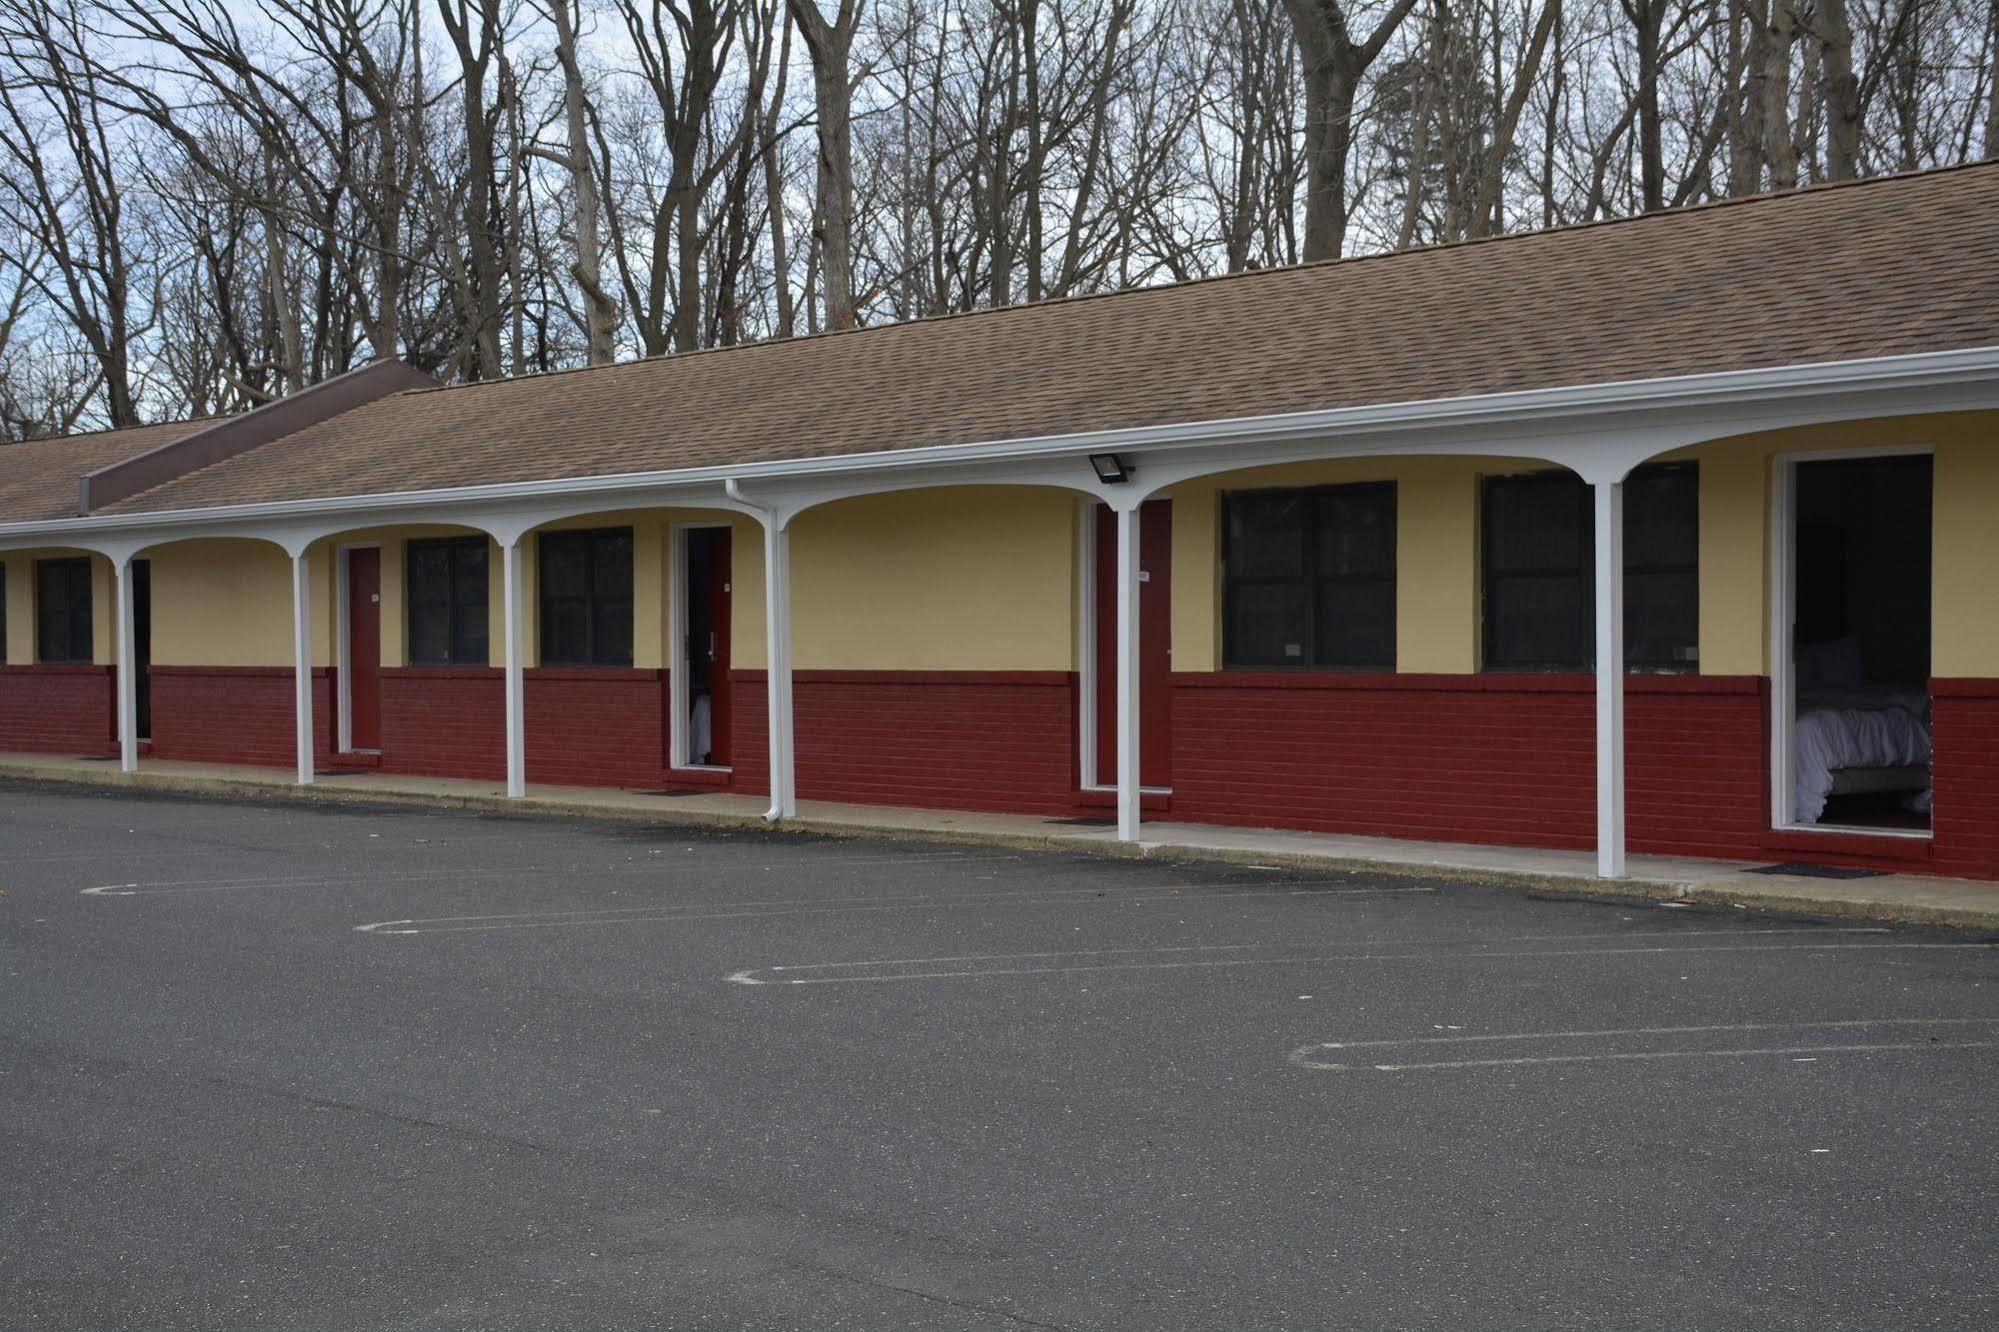 Atlantic Inn And Suites - Wall Township Exterior foto